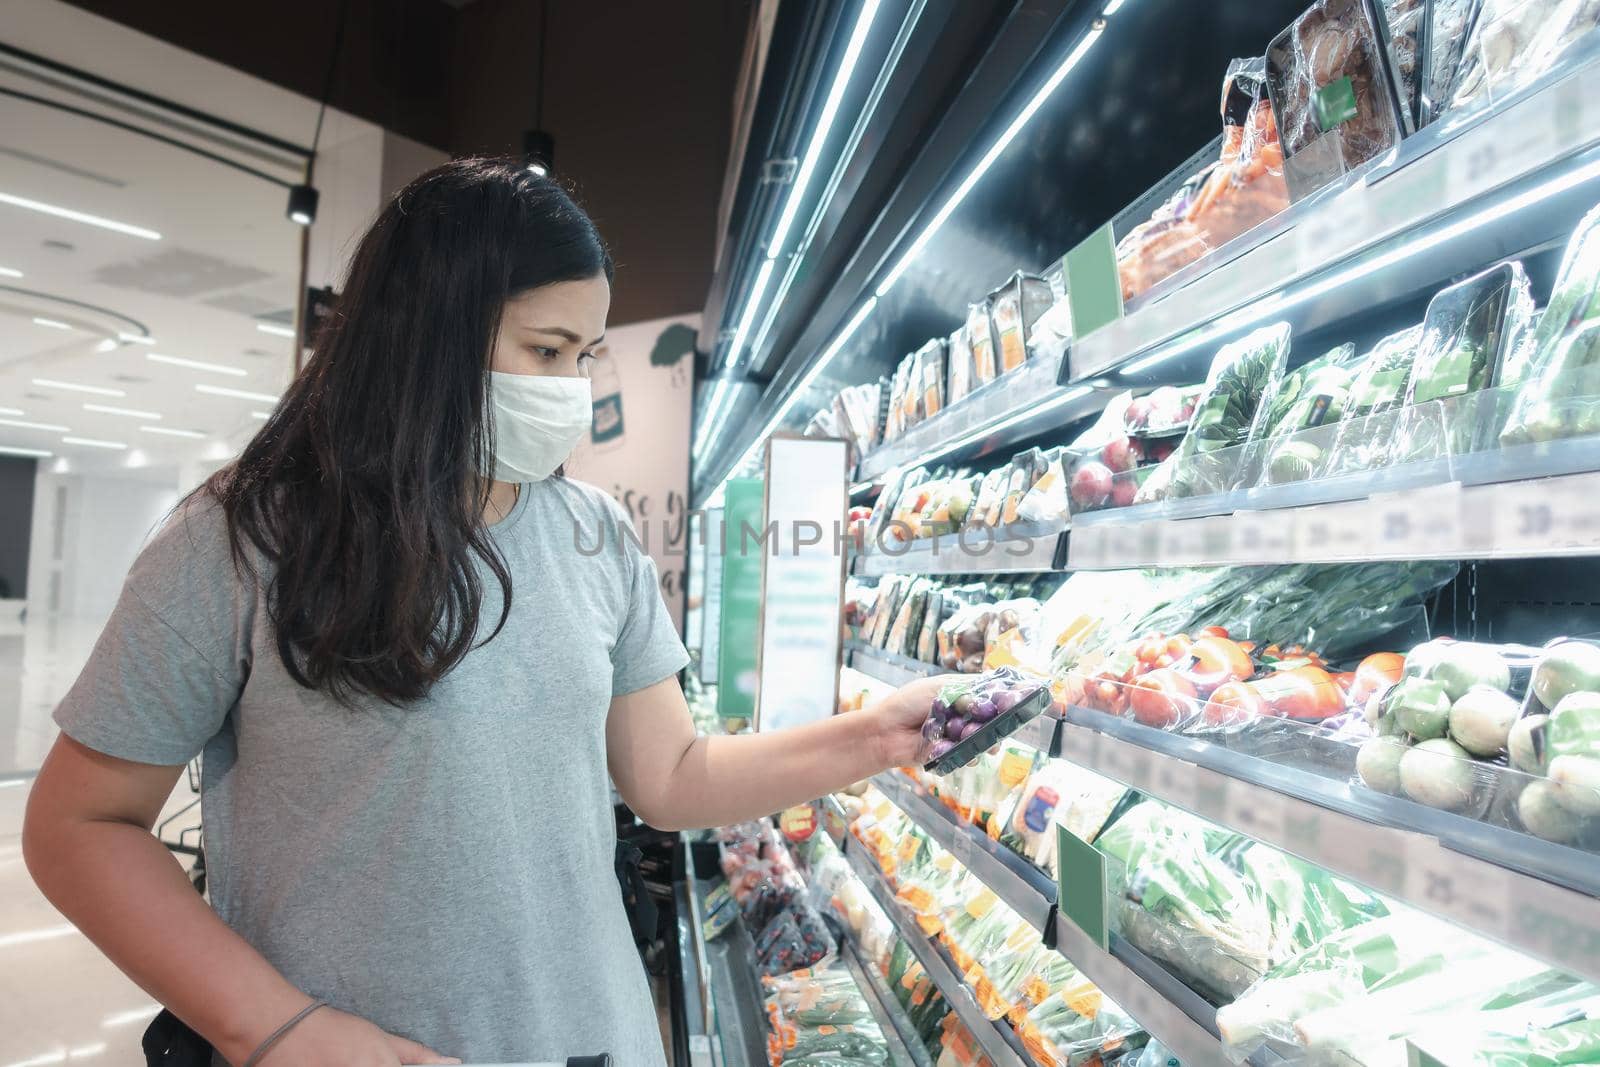 Customer Asian Woman Wearing Face Mask With Shopping Cart in Supermarket Department Store Shop While Choosing and Looking Vegetables on Shelf During Covid-19 Pandemic. Coronavirus Covid Situation 